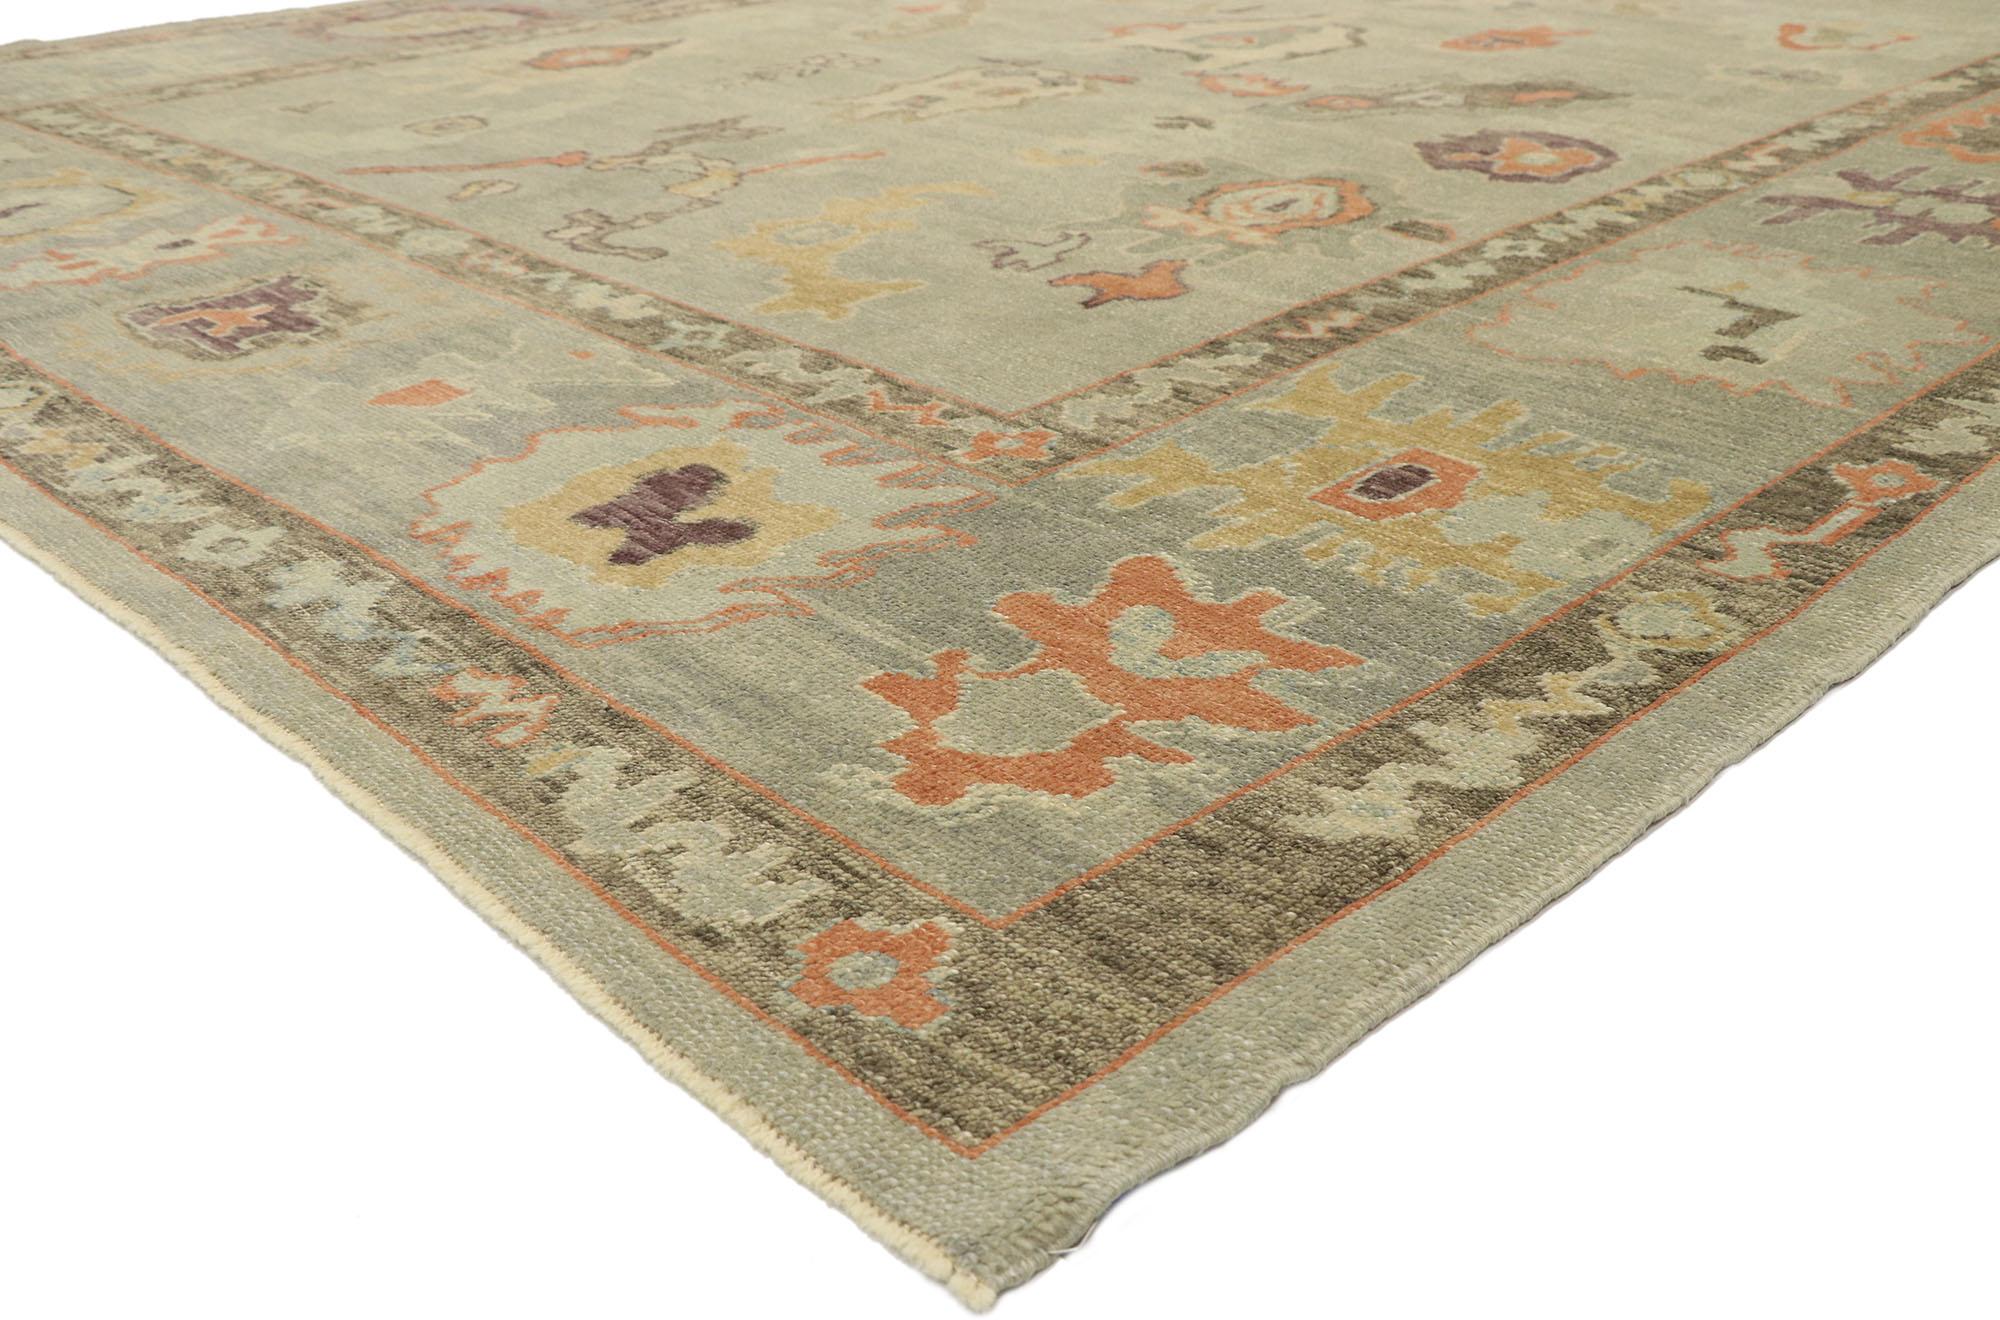 52858, new contemporary Turkish Oushak rug with modern Transitional style. Blending elements from the modern world with light and airy colors, this hand knotted wool contemporary Turkish Oushak rug will boost the coziness factor in nearly any space.